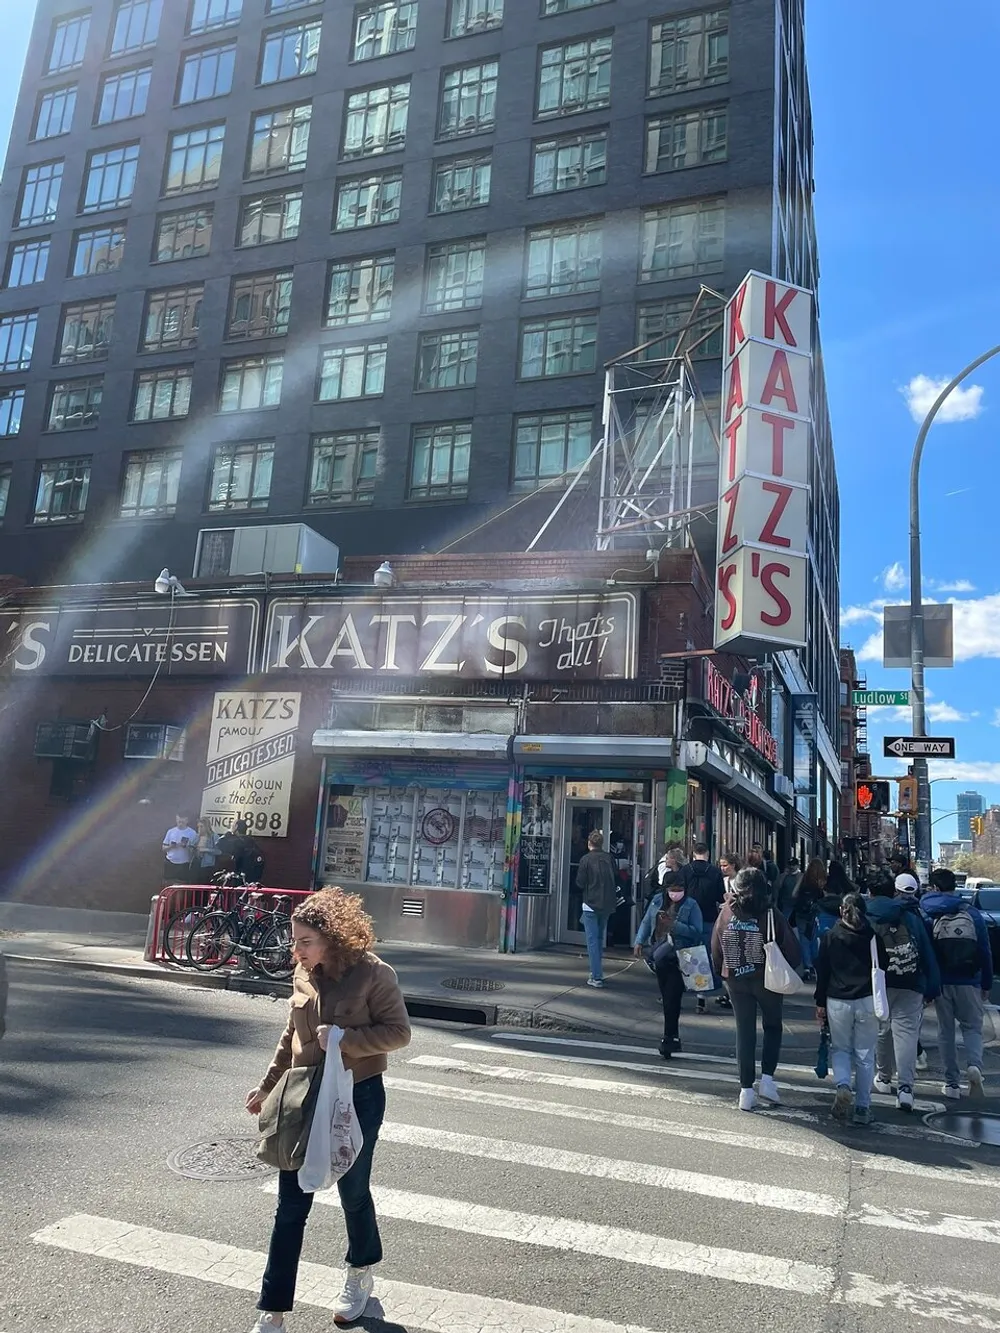 A busy street scene in front of Katzs Delicatessen featuring pedestrians and a prominent red and white sign under clear blue skies